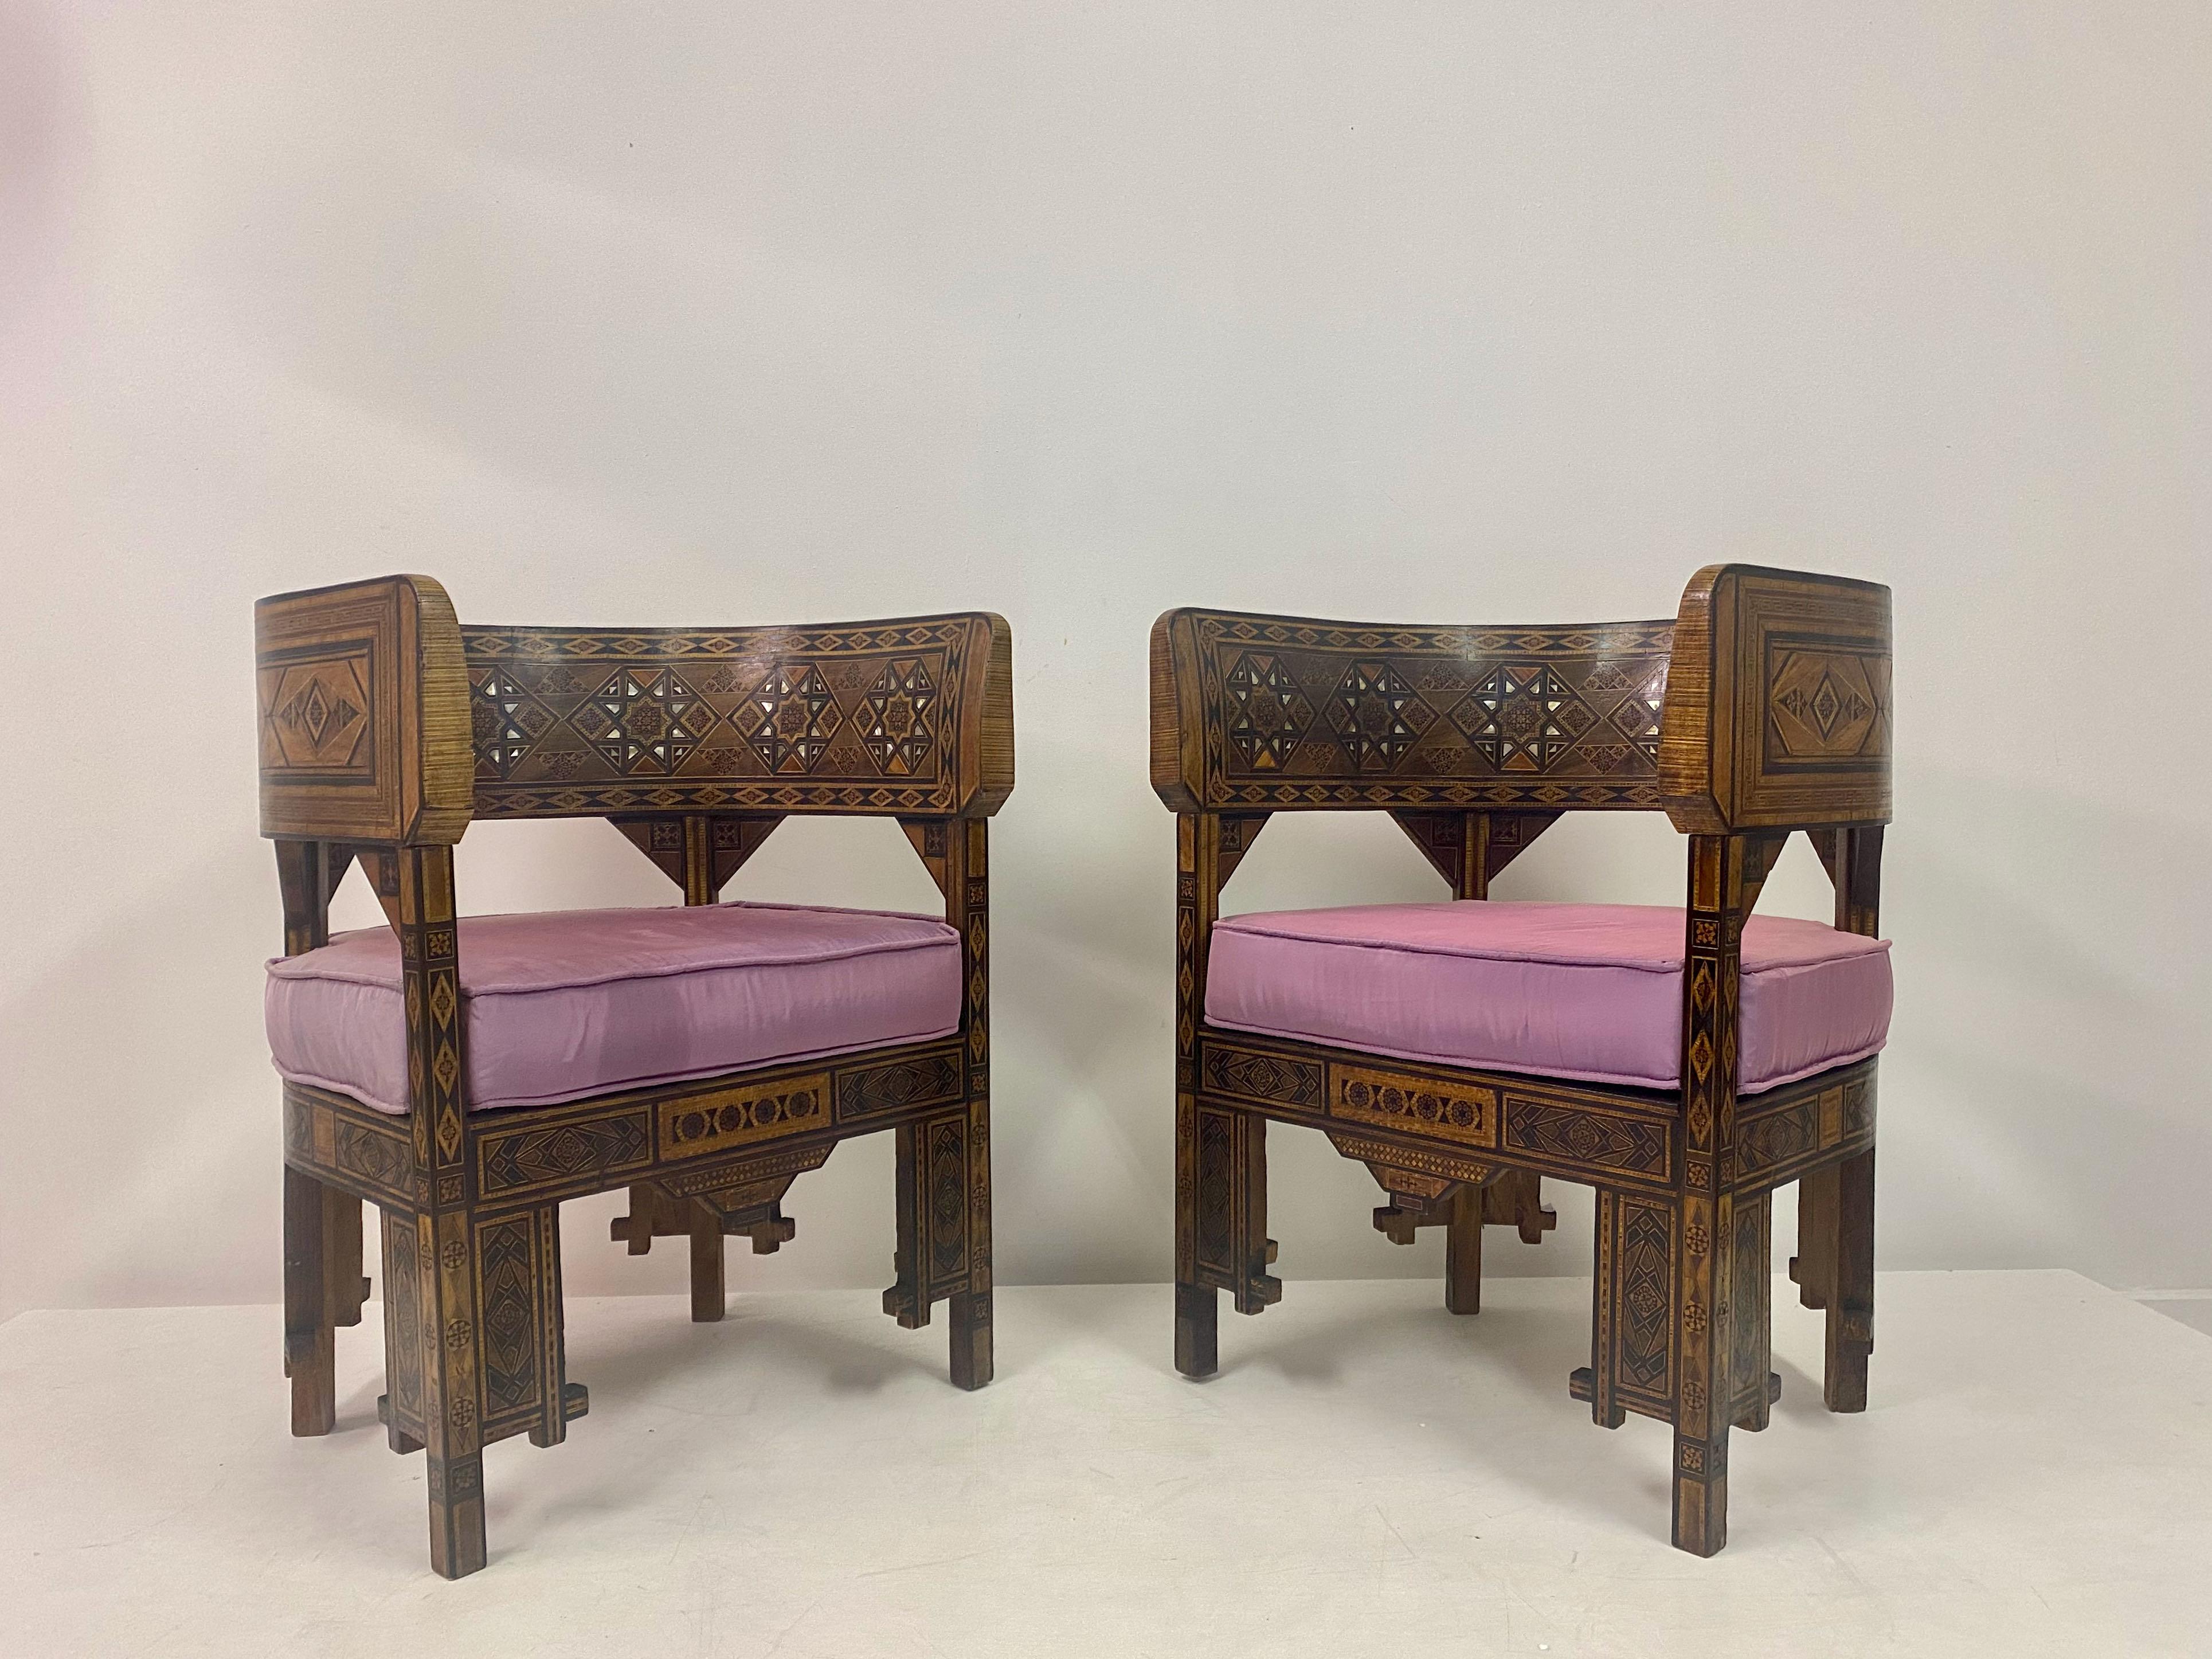 Pair of Syrian Walnut And Parquetry Tub Armchairs In Good Condition For Sale In London, London